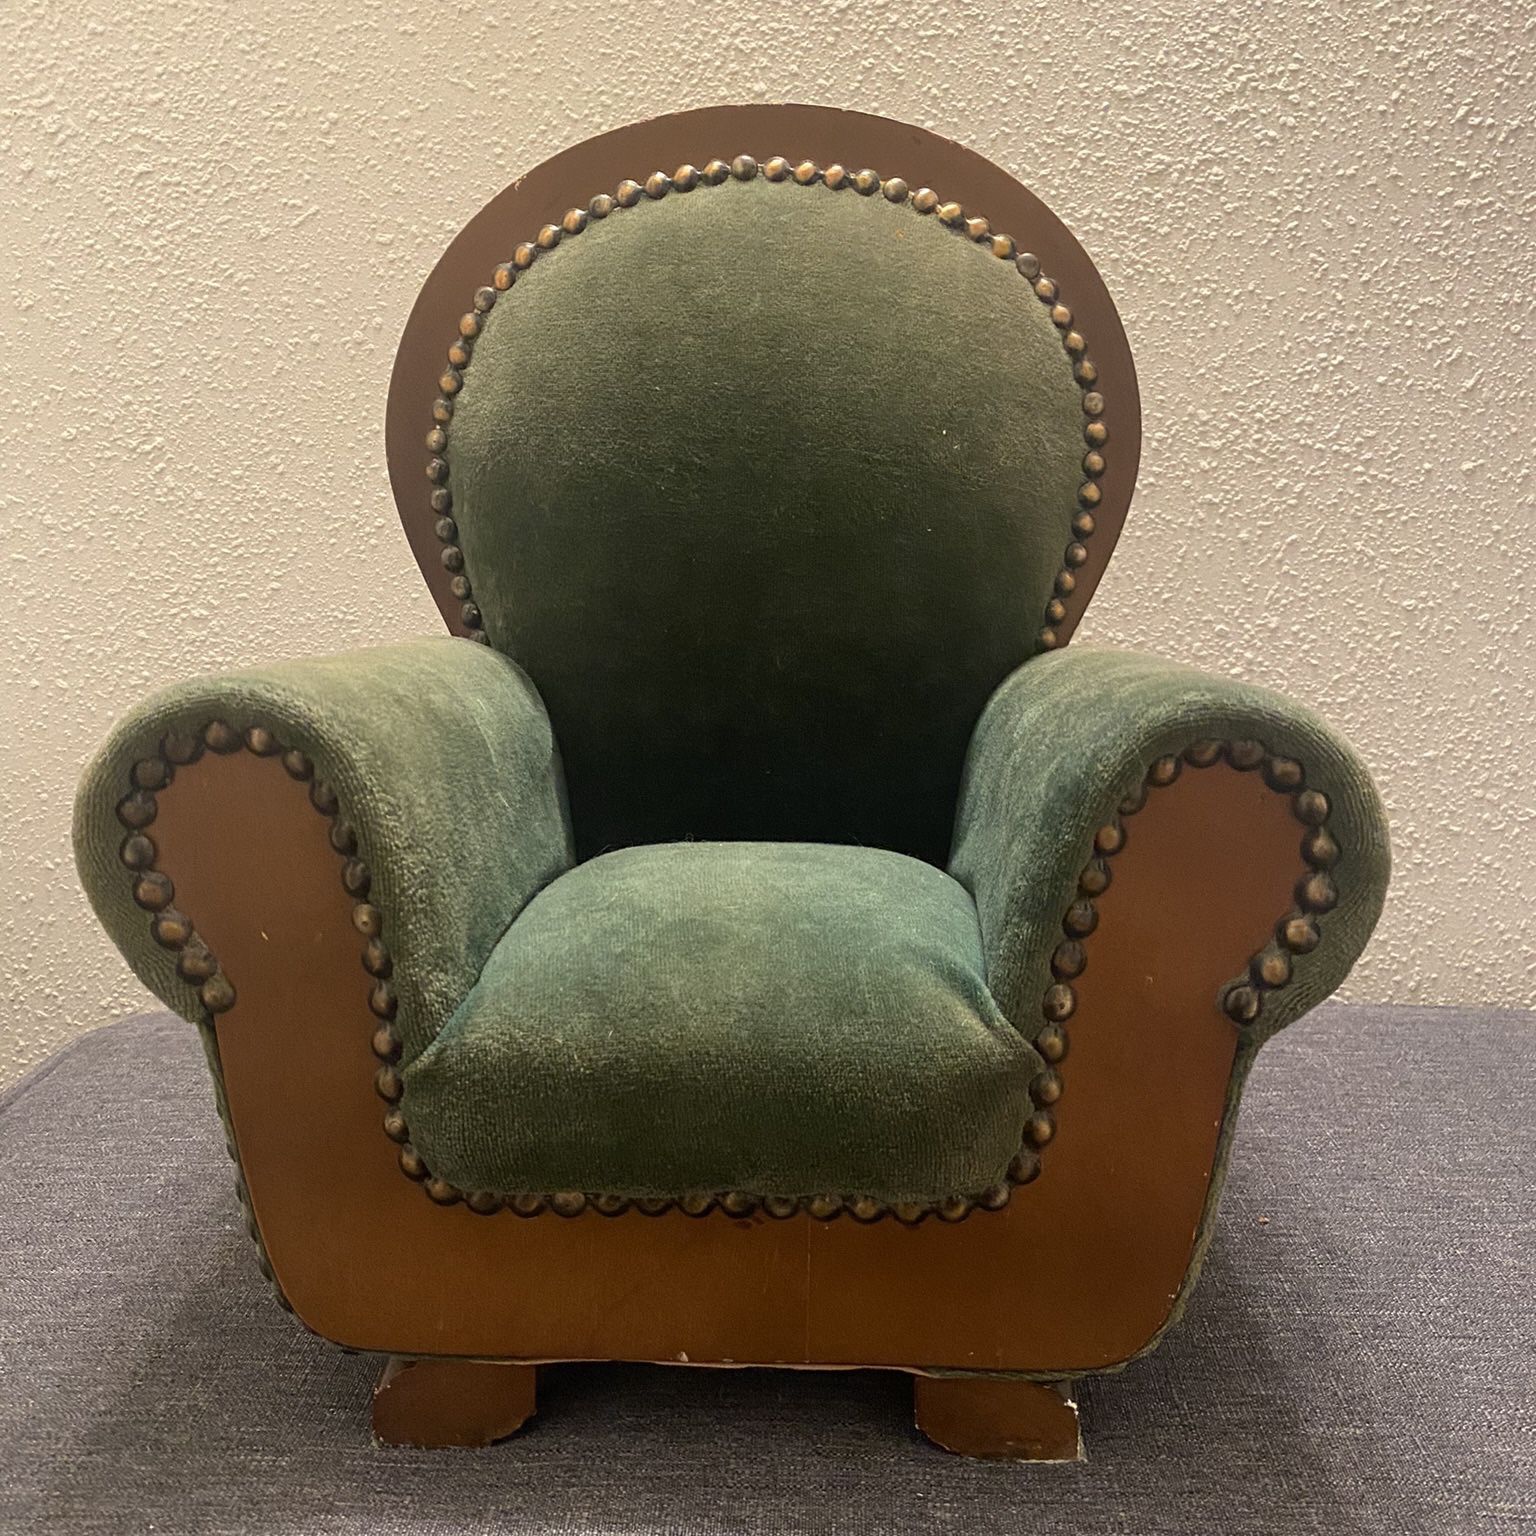 Antique American “Doll Chair”Heirloom Collection  Green Velvet 15" Tall